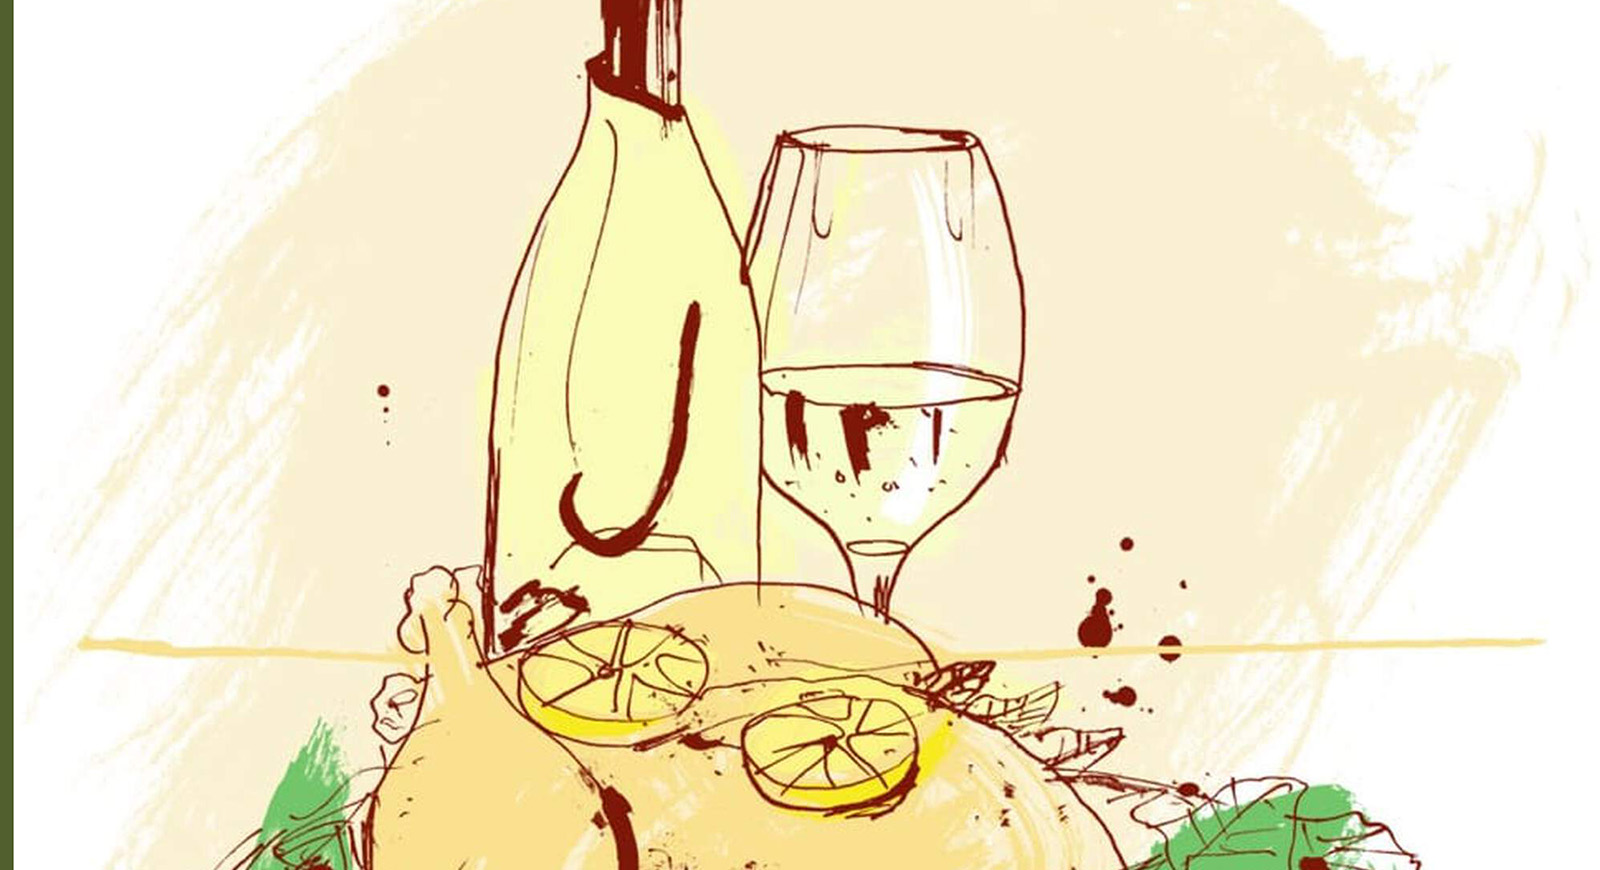 Sketch of a roast chicken with a bottle of red wine on a table